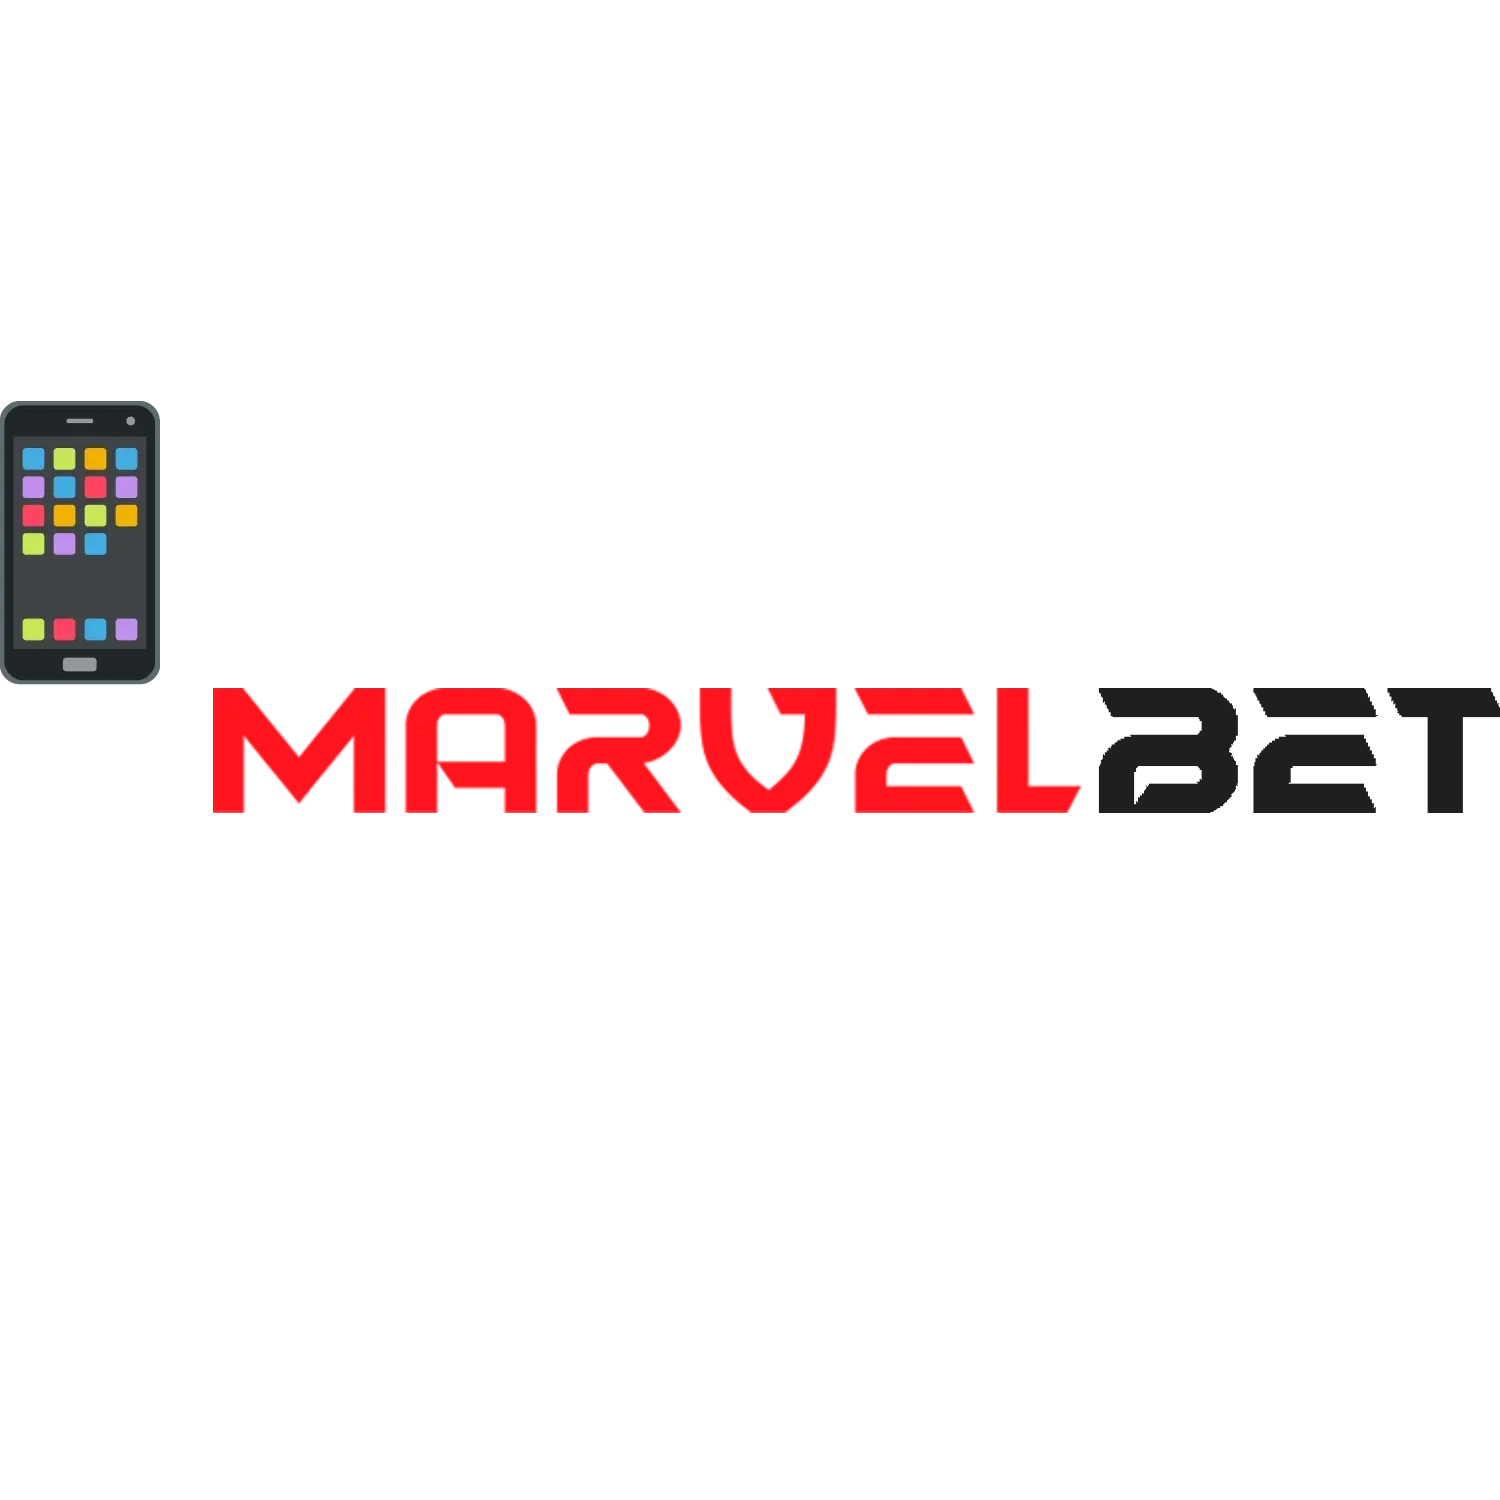 The Marvelbet app offers live streaming and a customised interface.